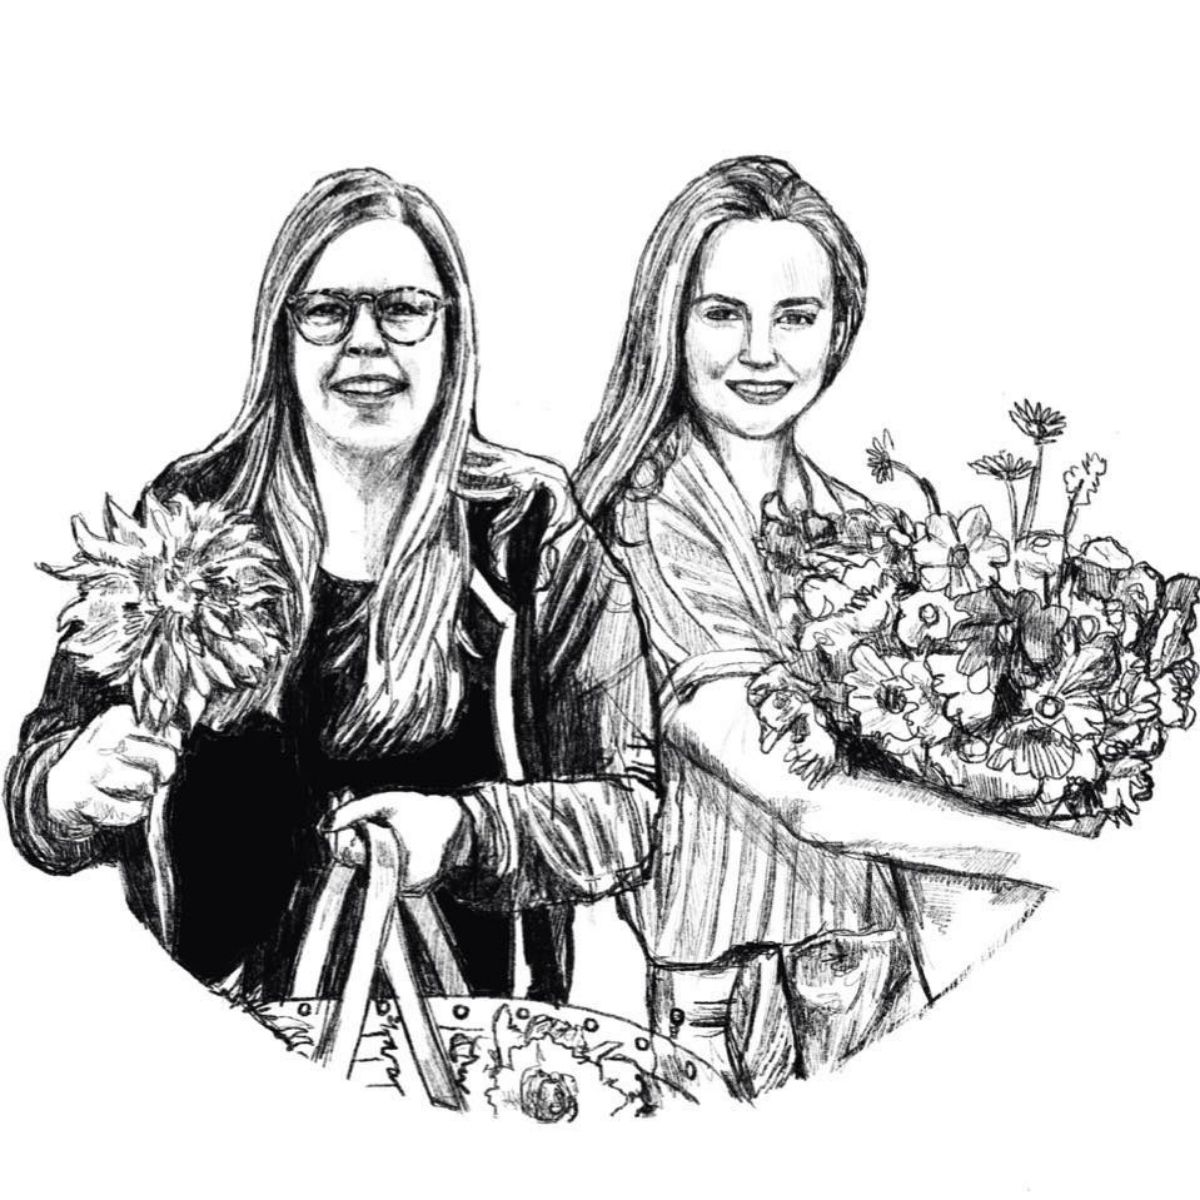 Let's grow girls podcast hosts